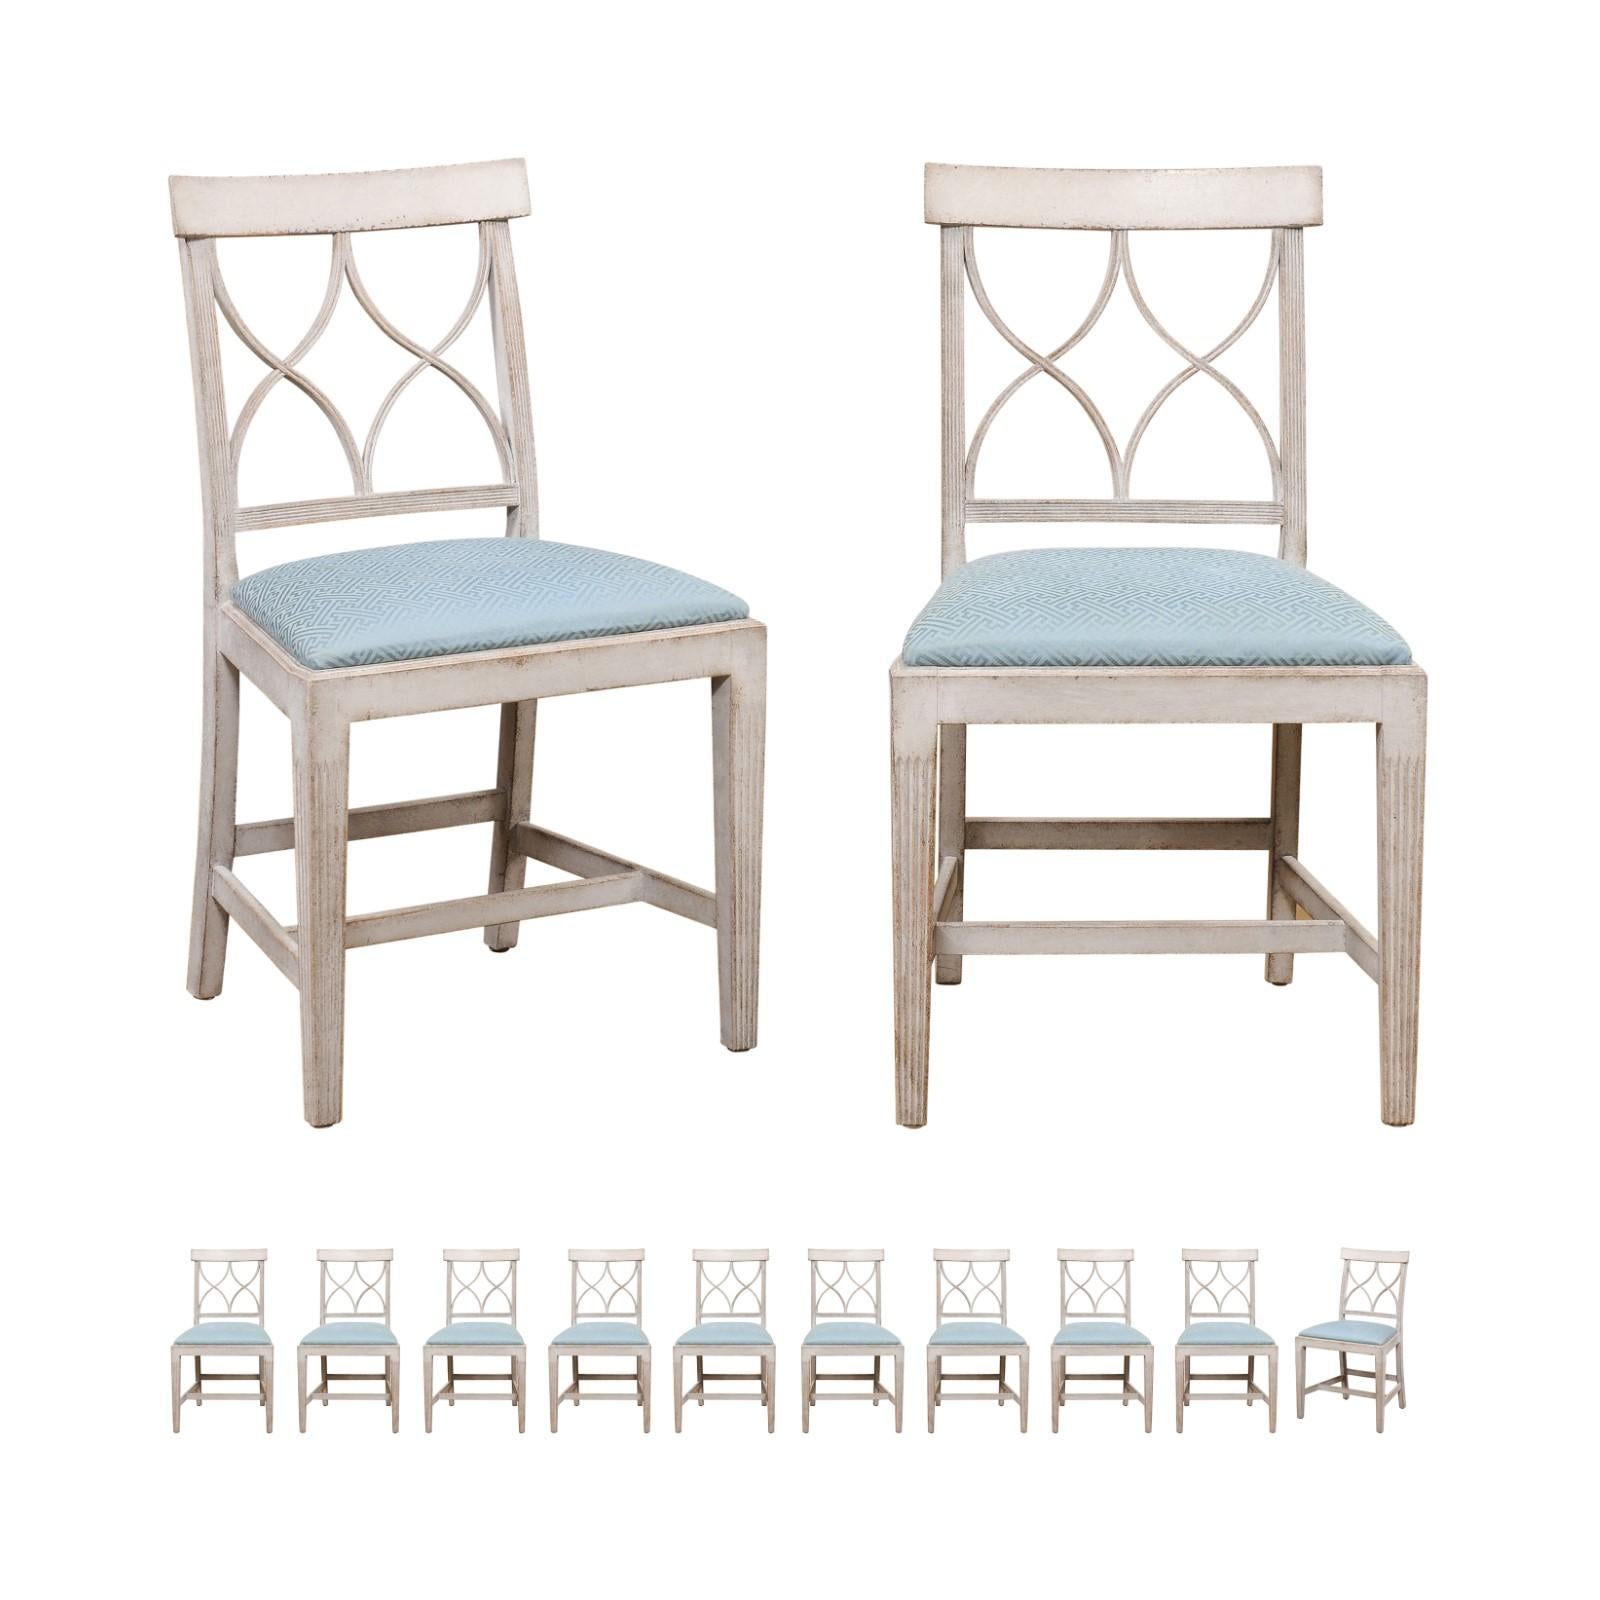 A set of 12 Swedish dining room side chairs from the early 20th century, with new upholstery. Created in Sweden during the early years of the 20th century, each of this set of side chairs features an open back pierced with sinuous motifs and topped